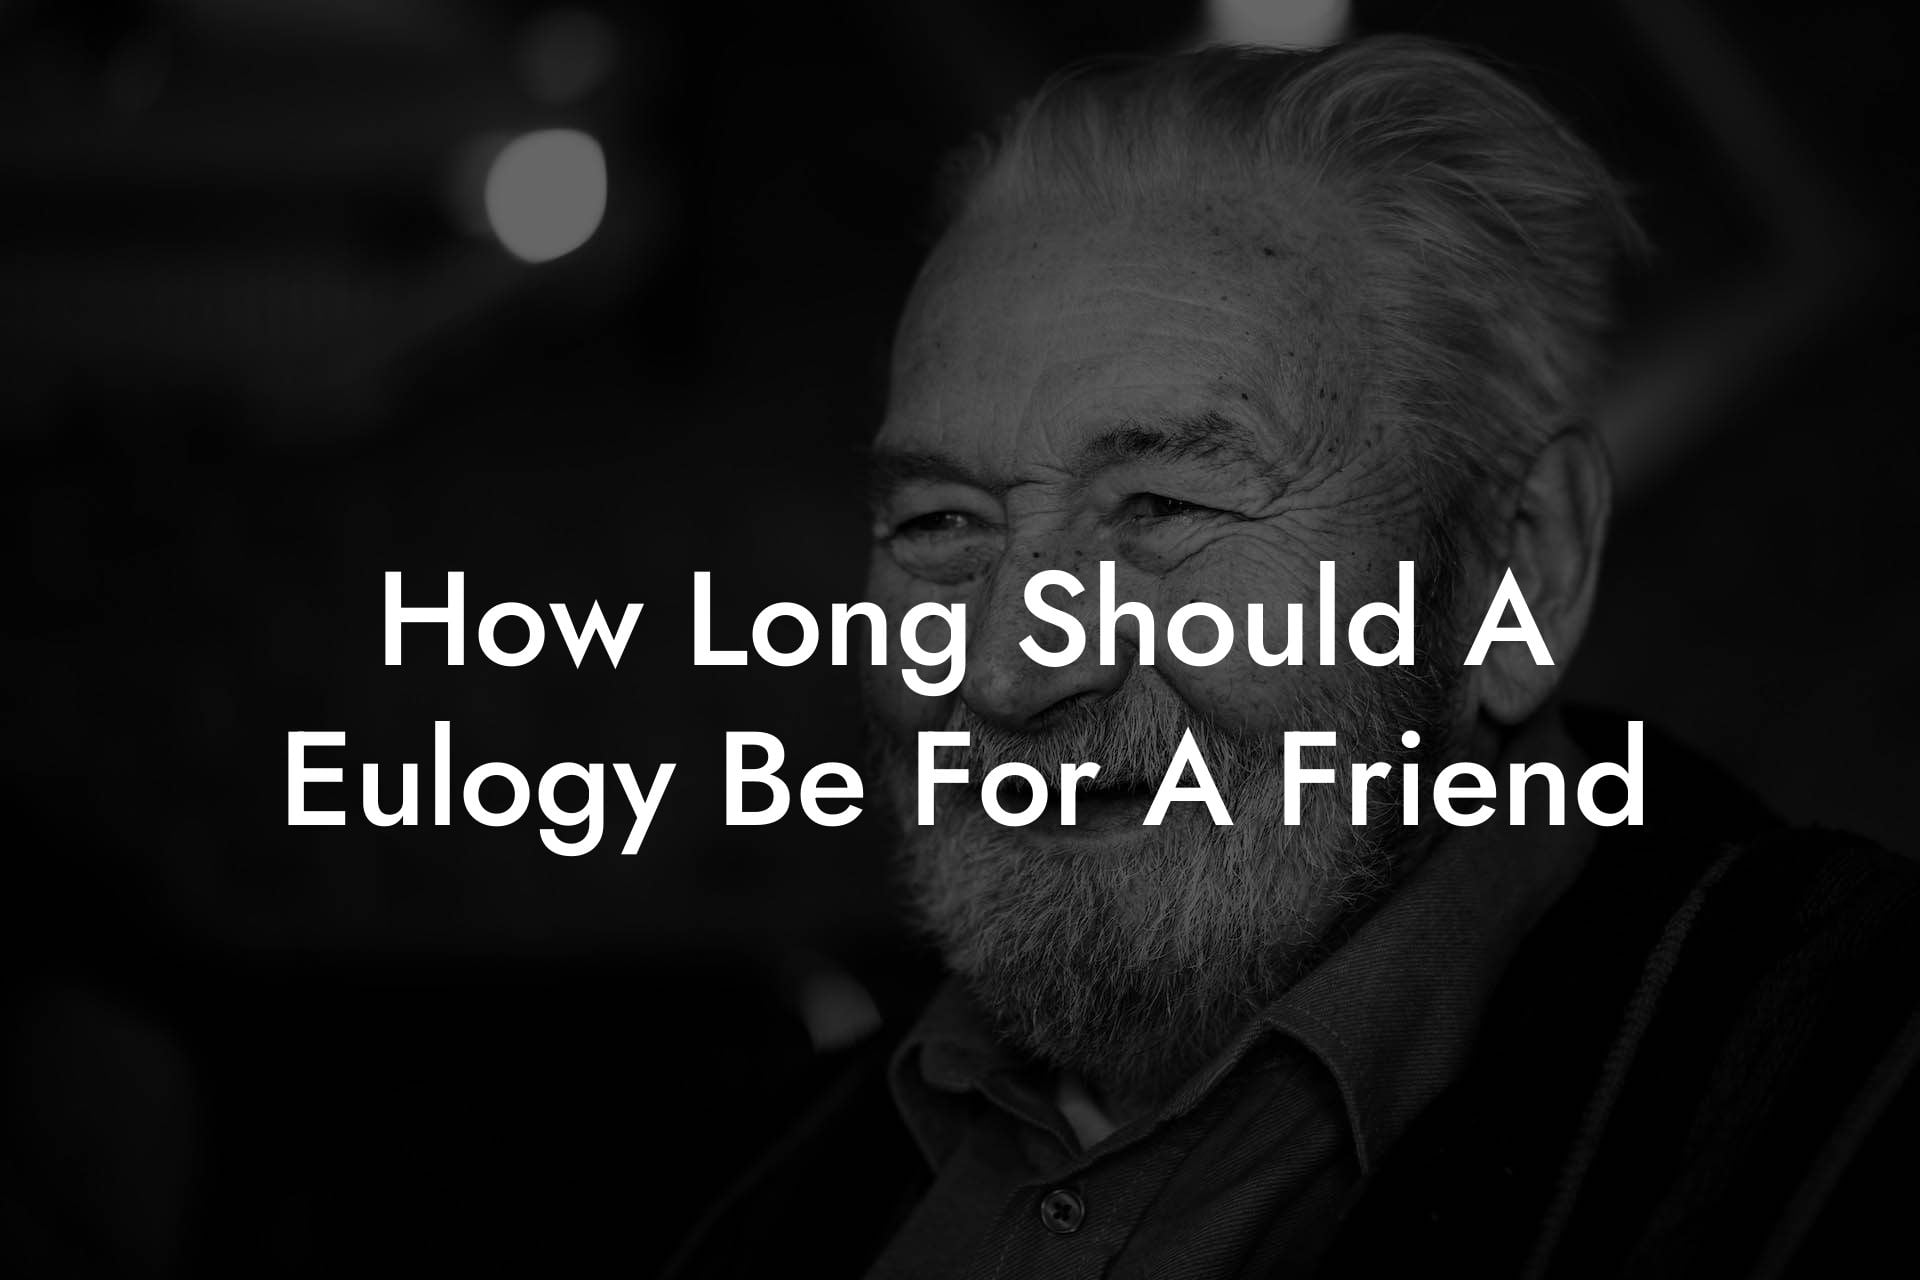 How Long Should A Eulogy Be For A Friend